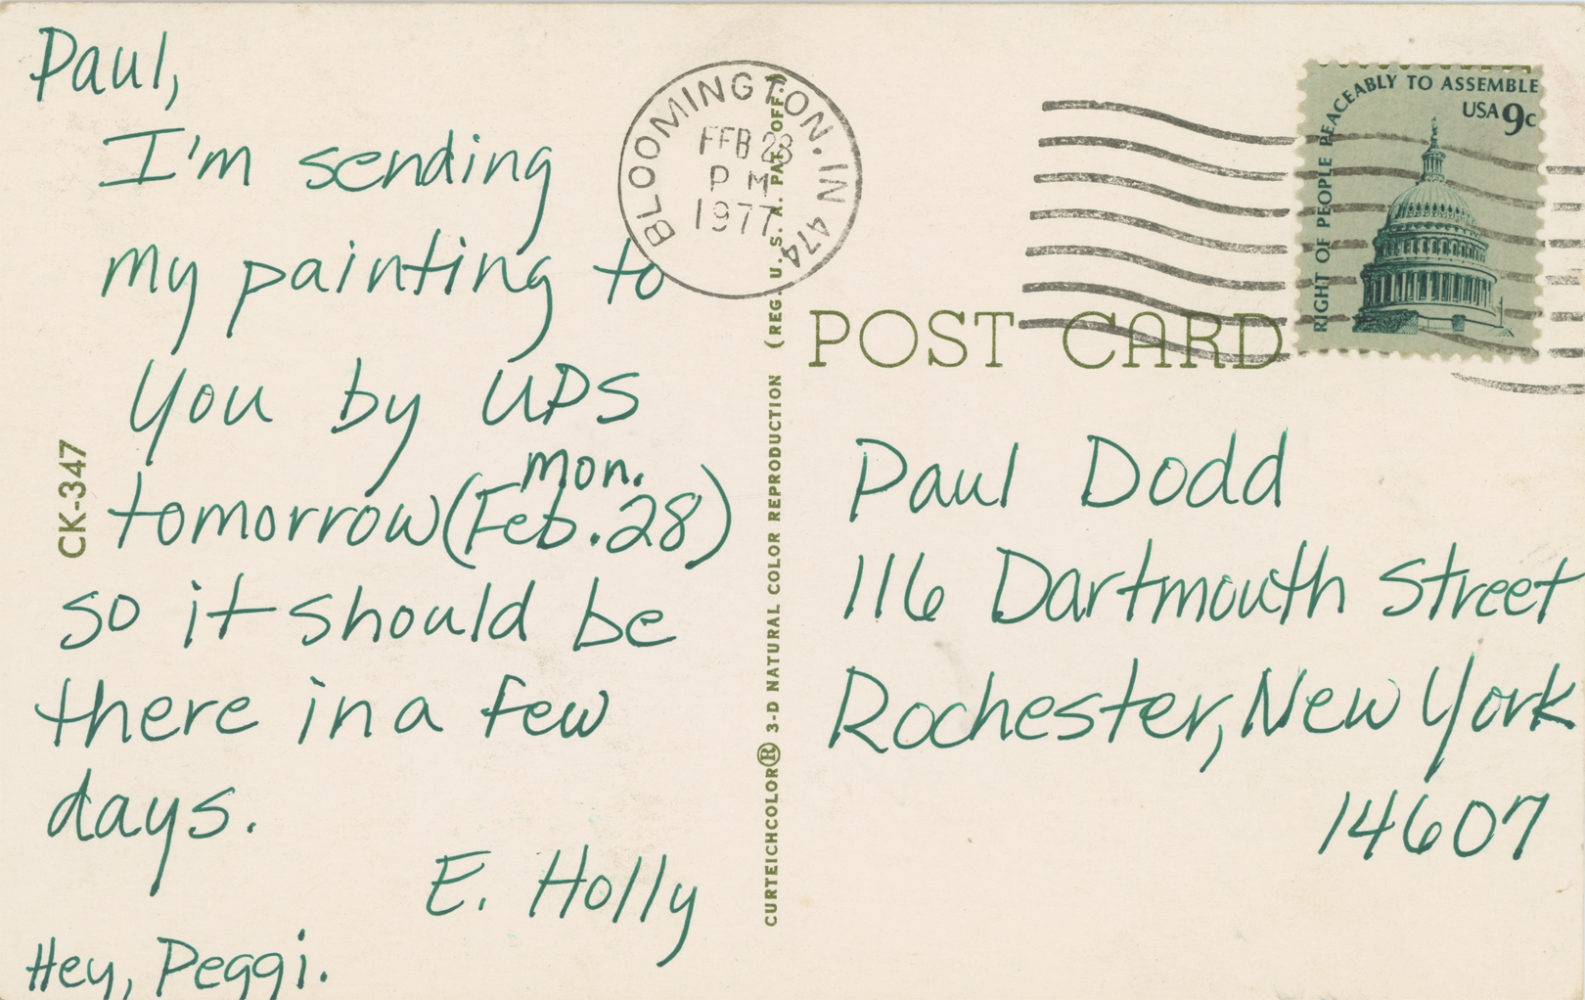 Postcard from Holly 1977